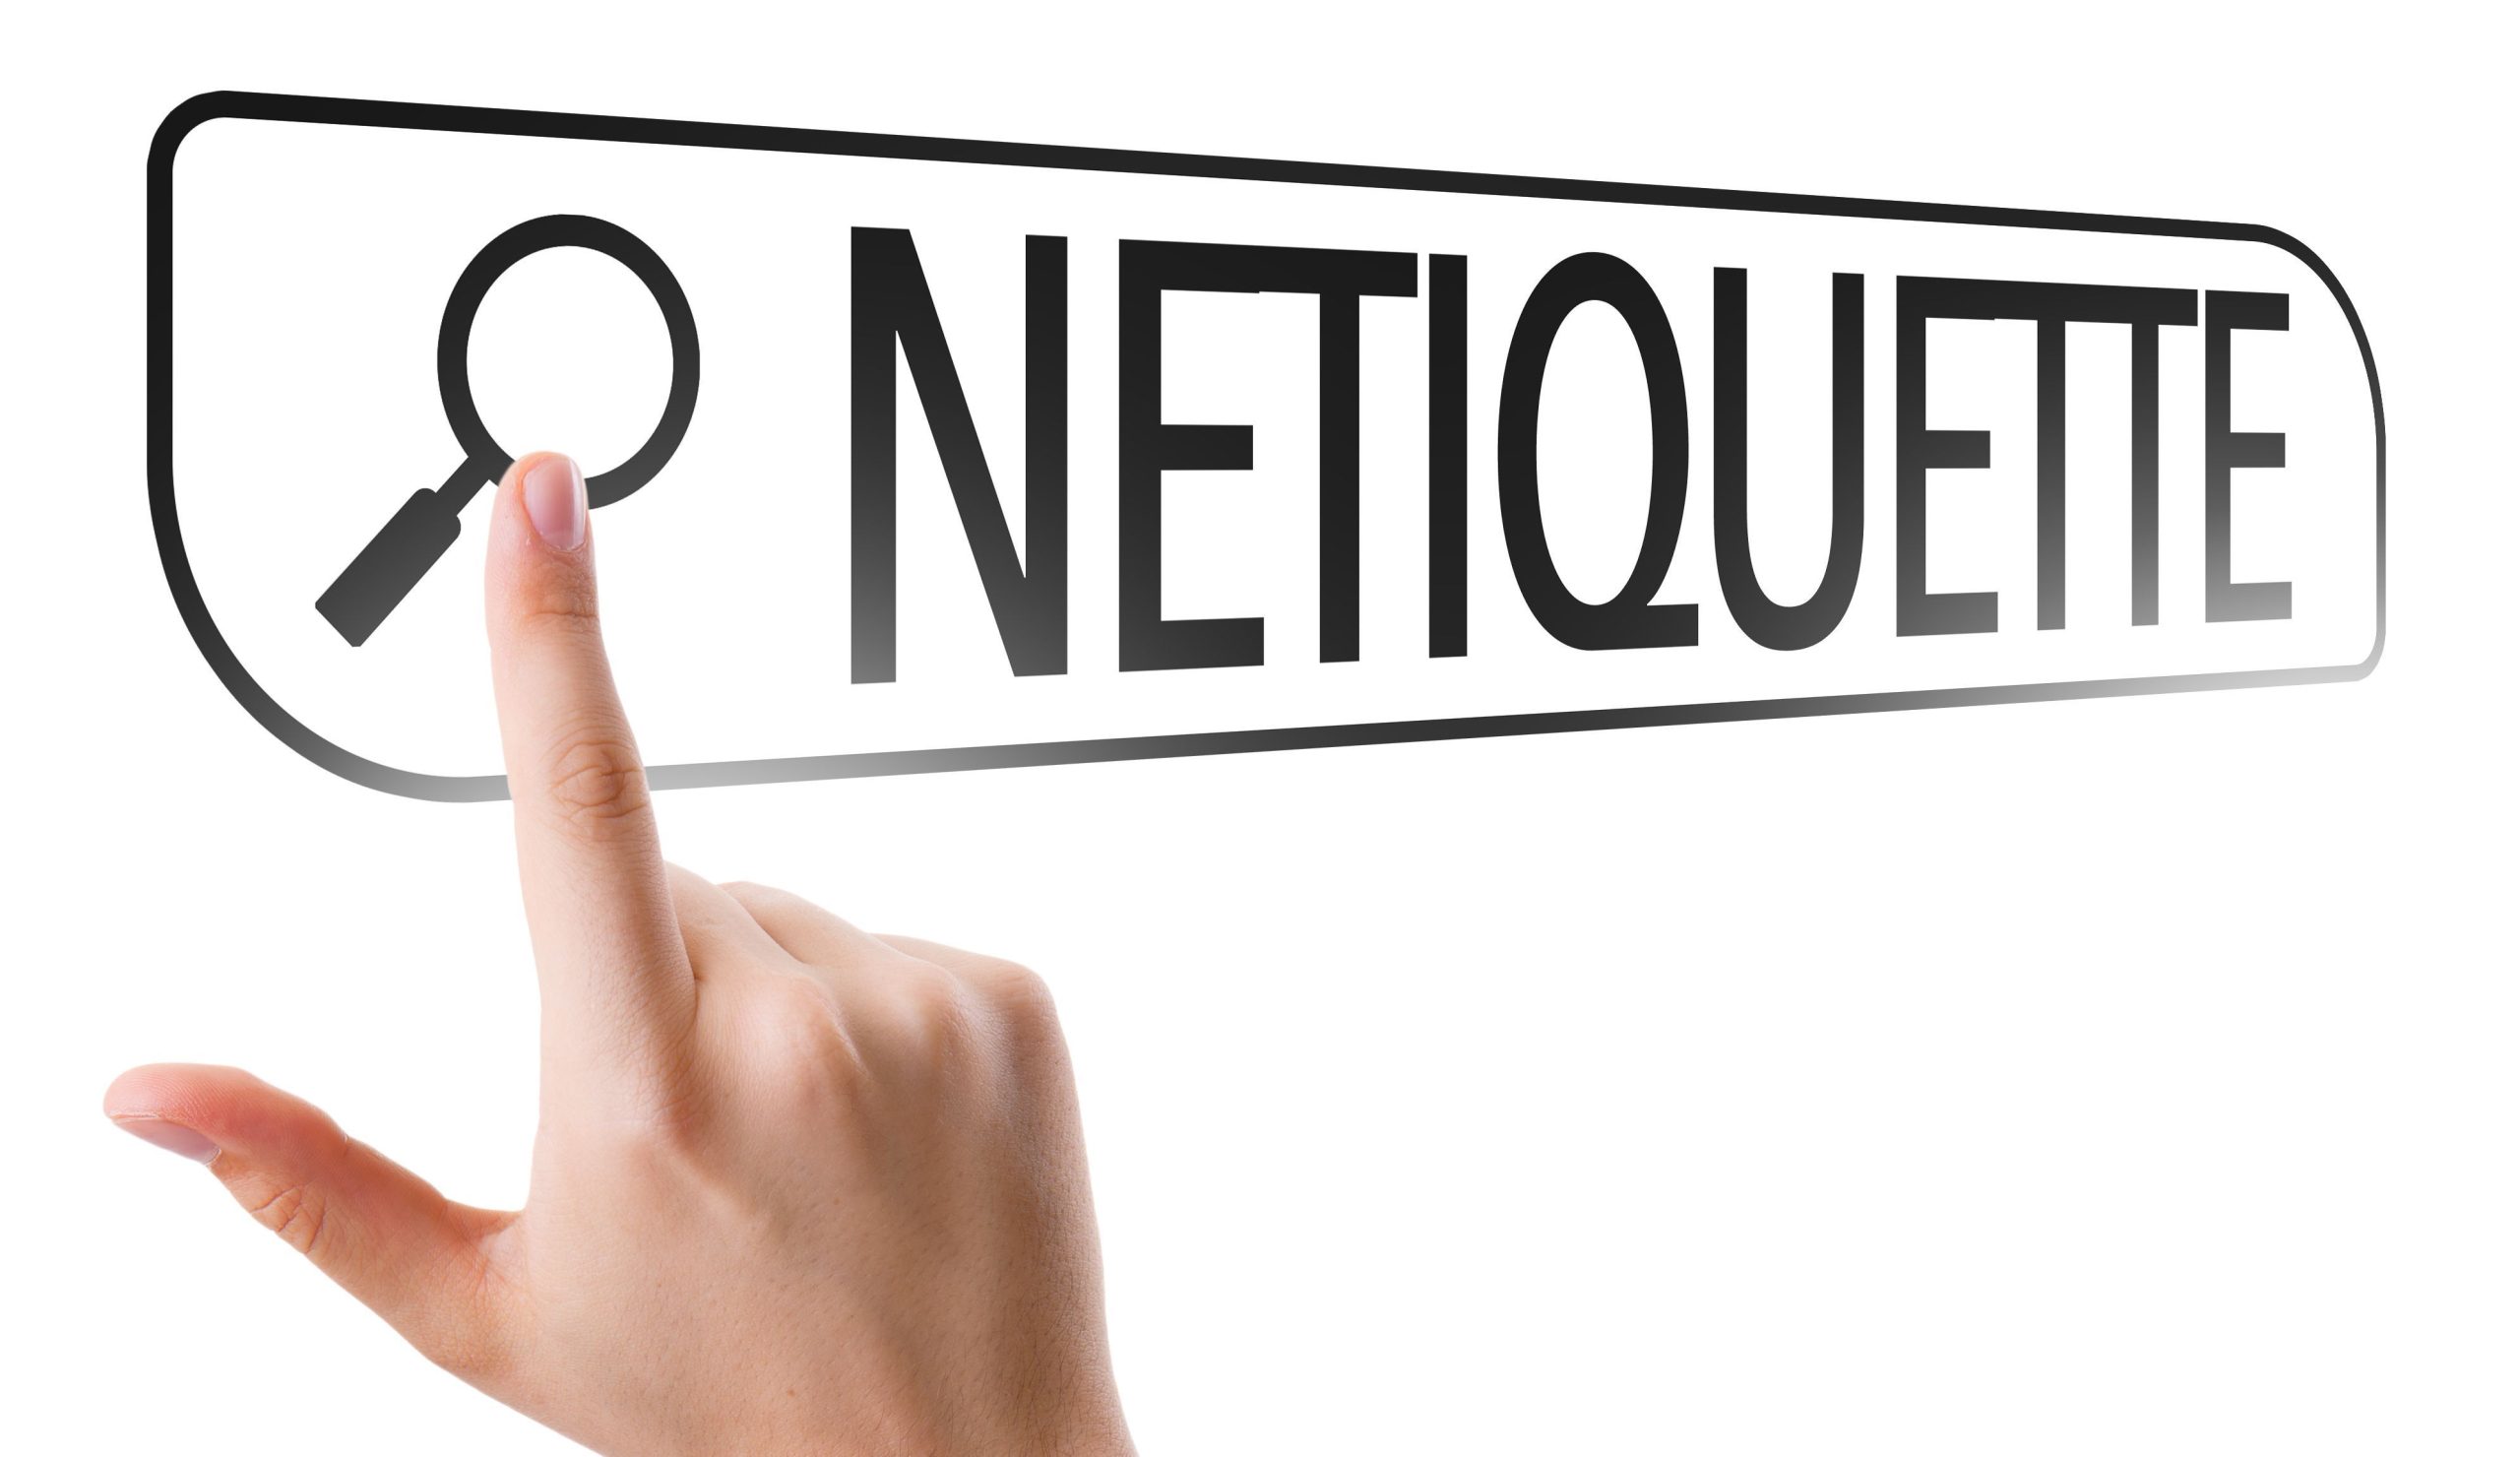 Netiquette or good manners on the internet